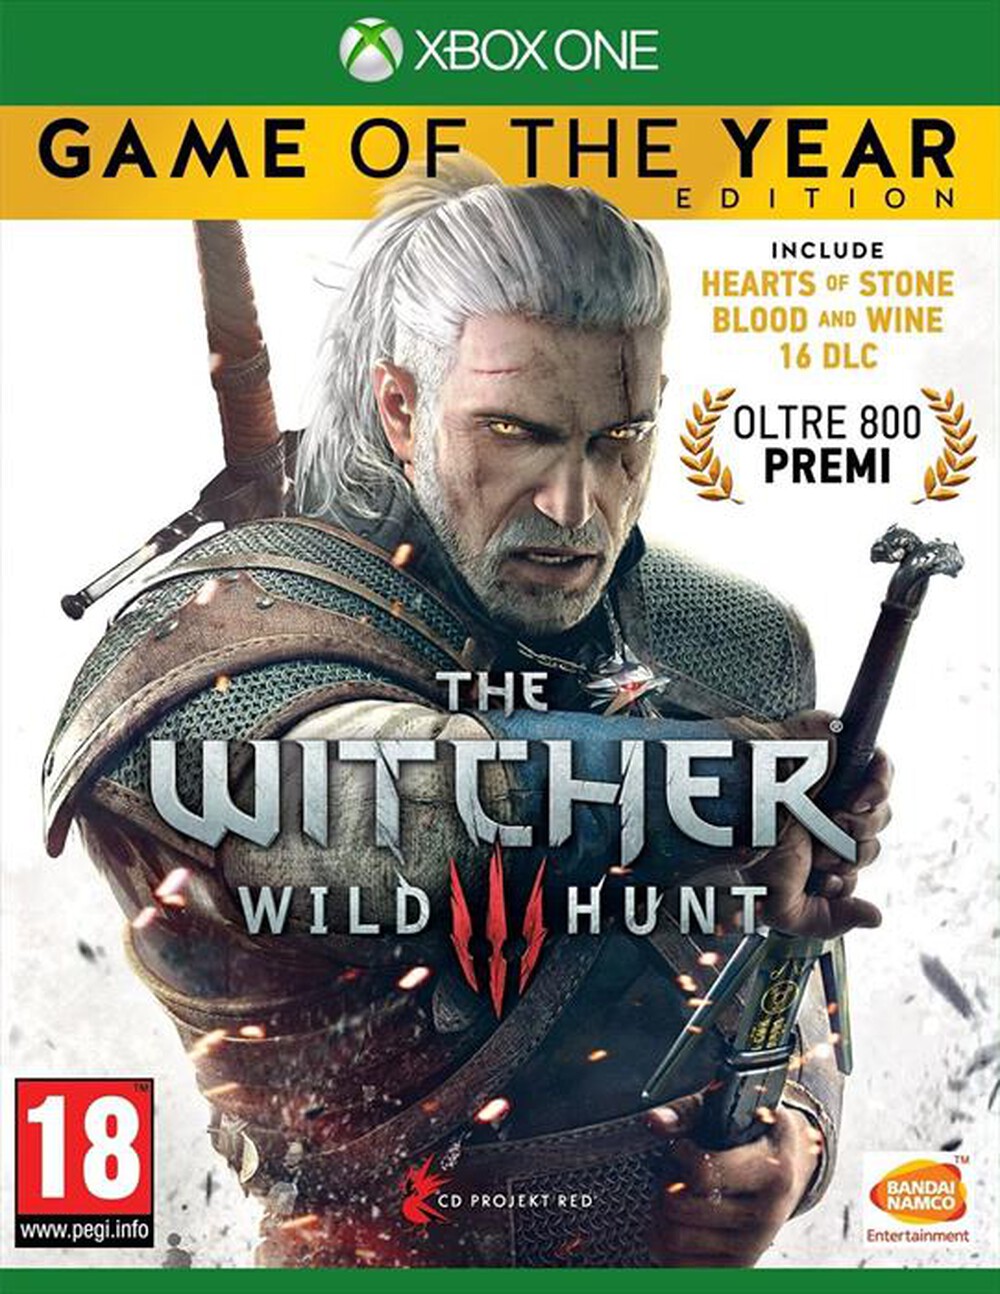 "NAMCO - The Witcher 3: The Wild Hunt GOTY EDITION Xbox One - "